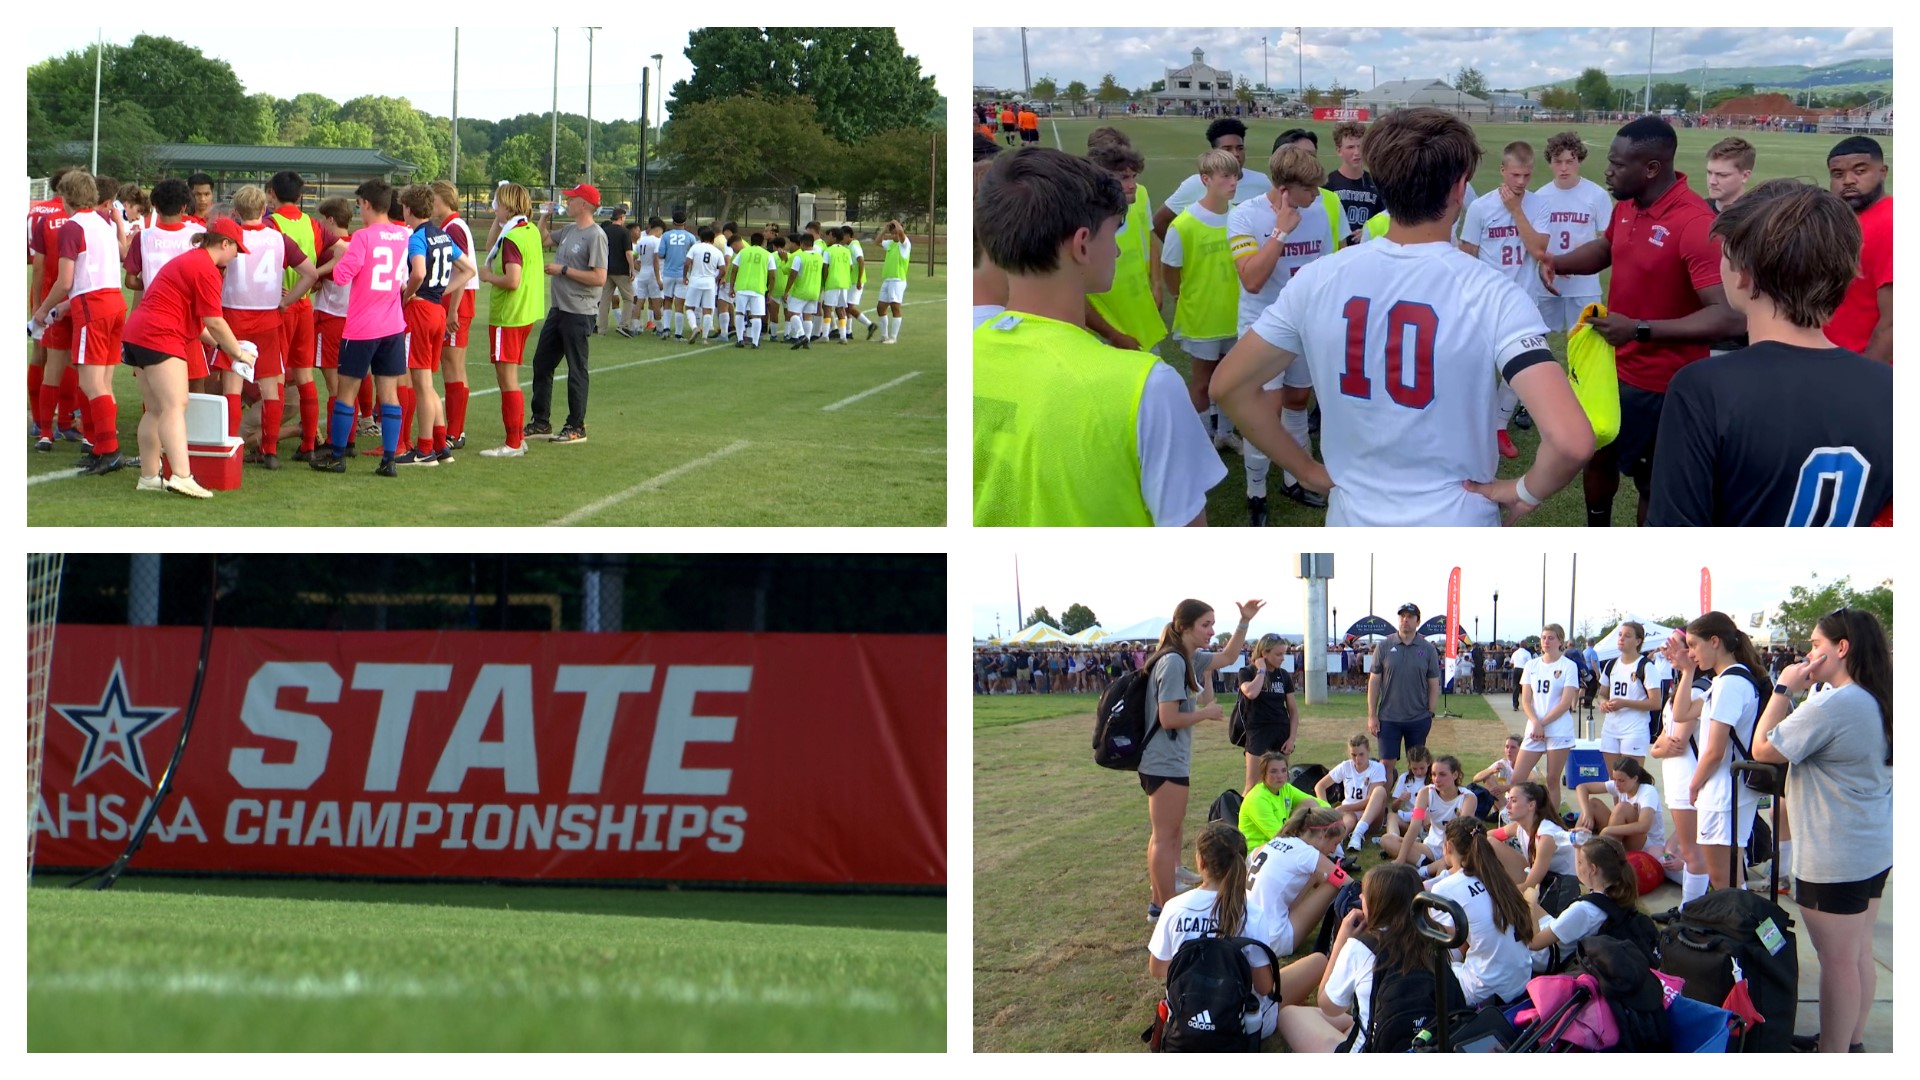 State soccer semifinals in Class 6A & 7A and finals between Classes 1A through 5A took center stage on Friday at John Hunt Park